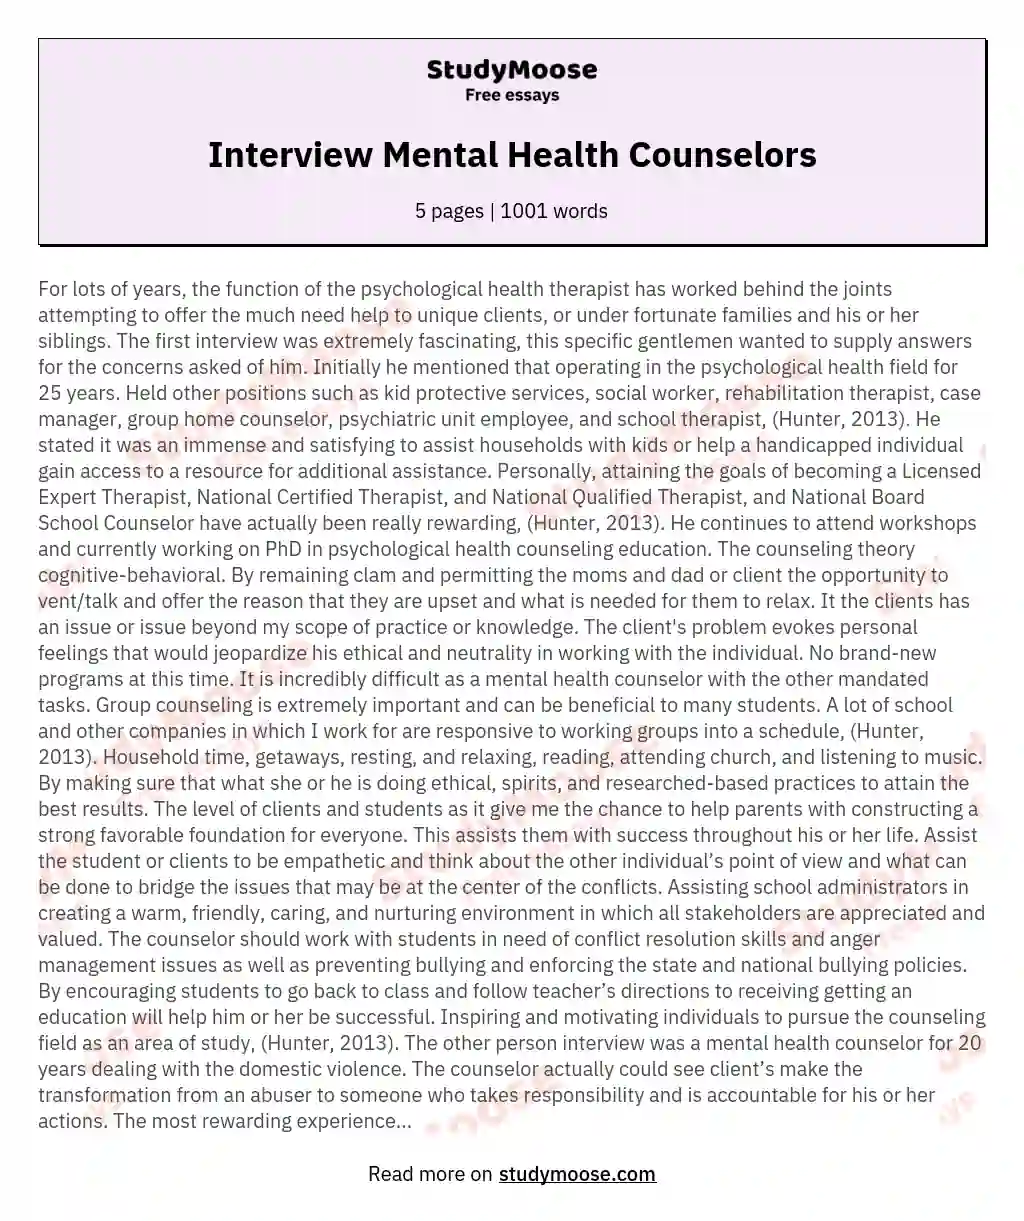 Interview Mental Health Counselors essay